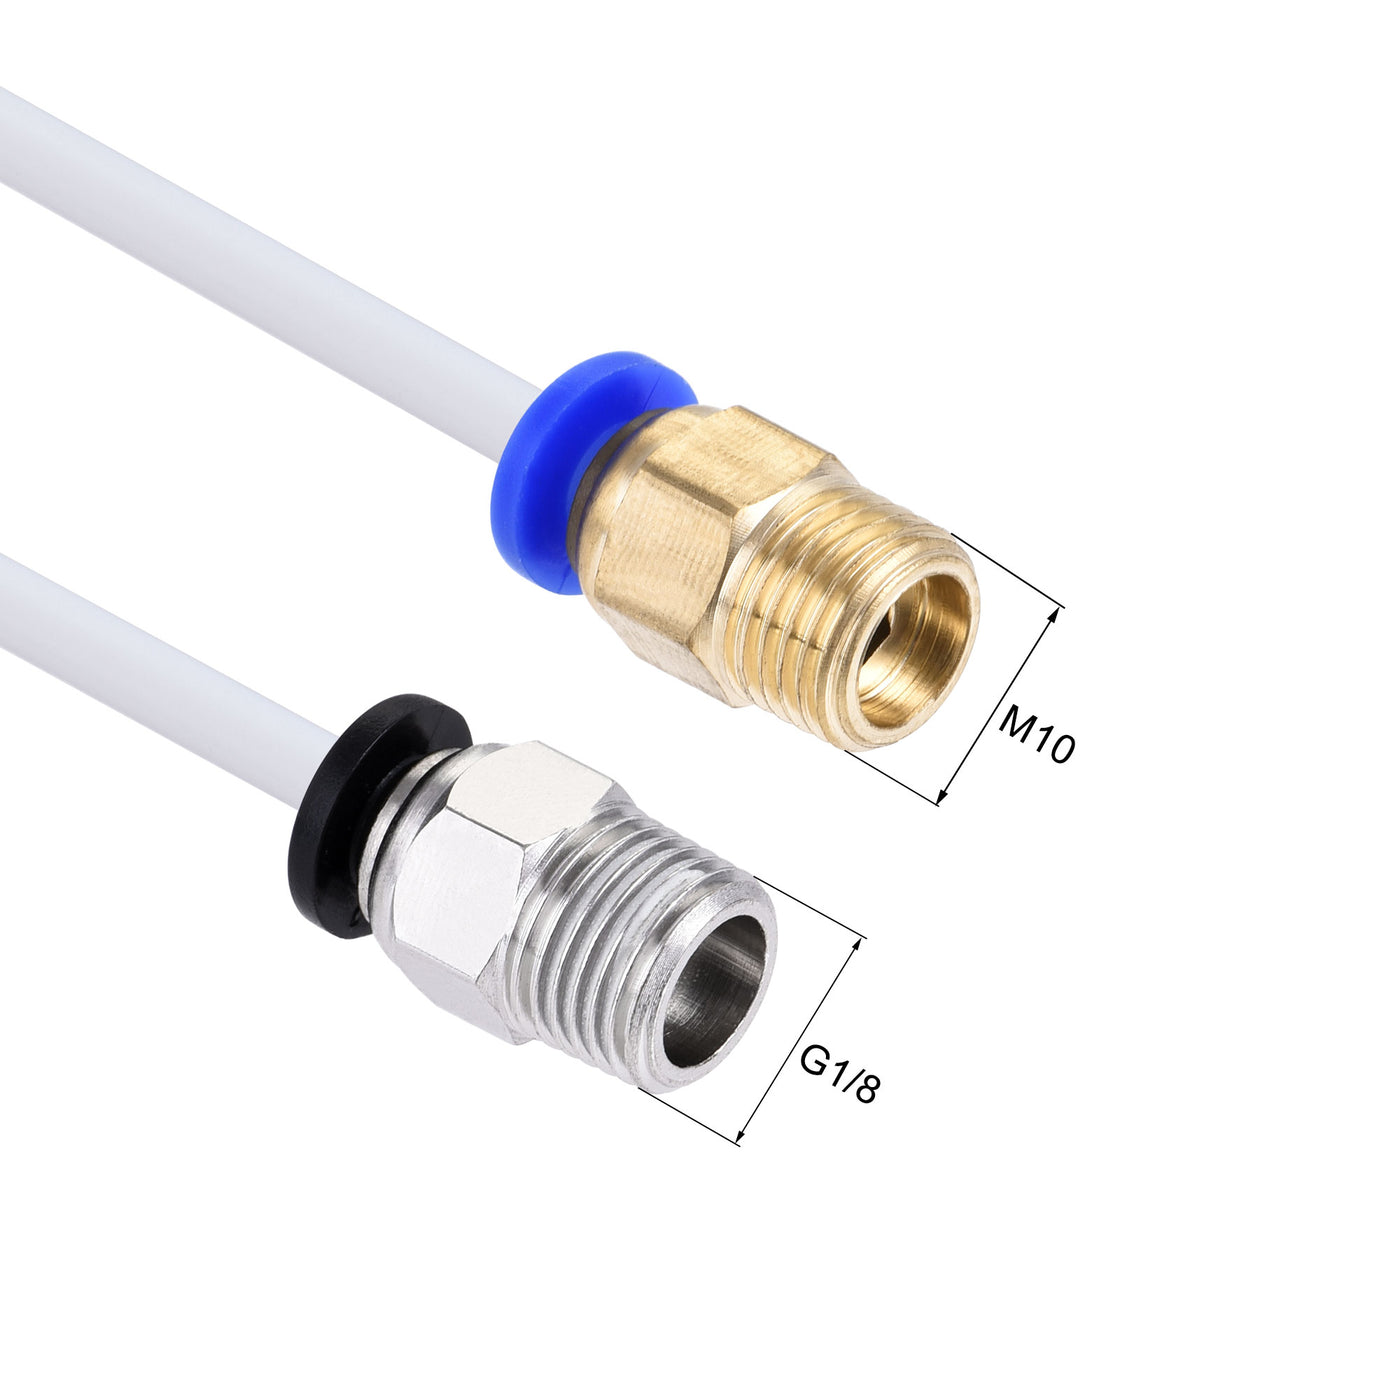 uxcell Uxcell Pneumatic PTFE Air Tubing Kit Hose Air Line Tubing 4mm OD 2M White with M10 G1/8 Push to Connect Fittings